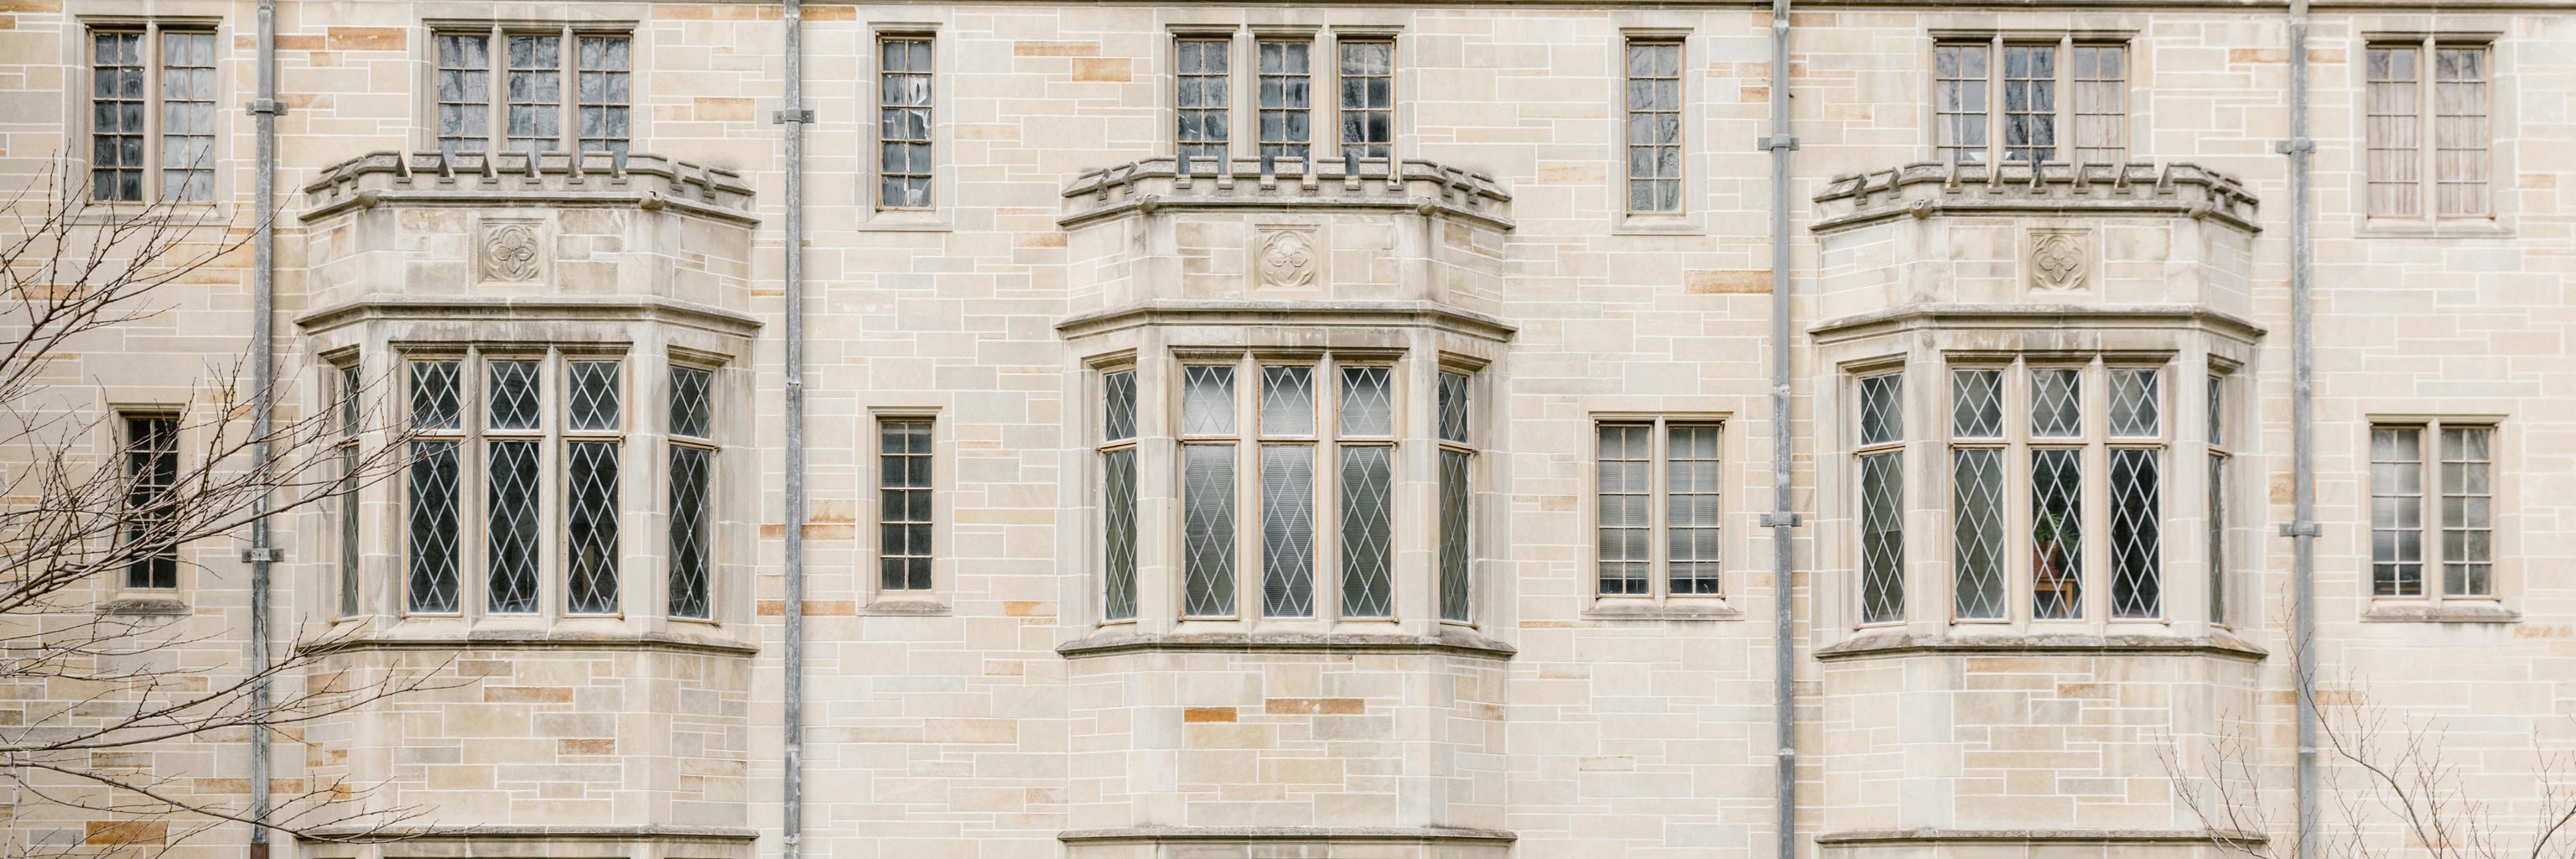 side of old limestone building with ornate cross hatch windows